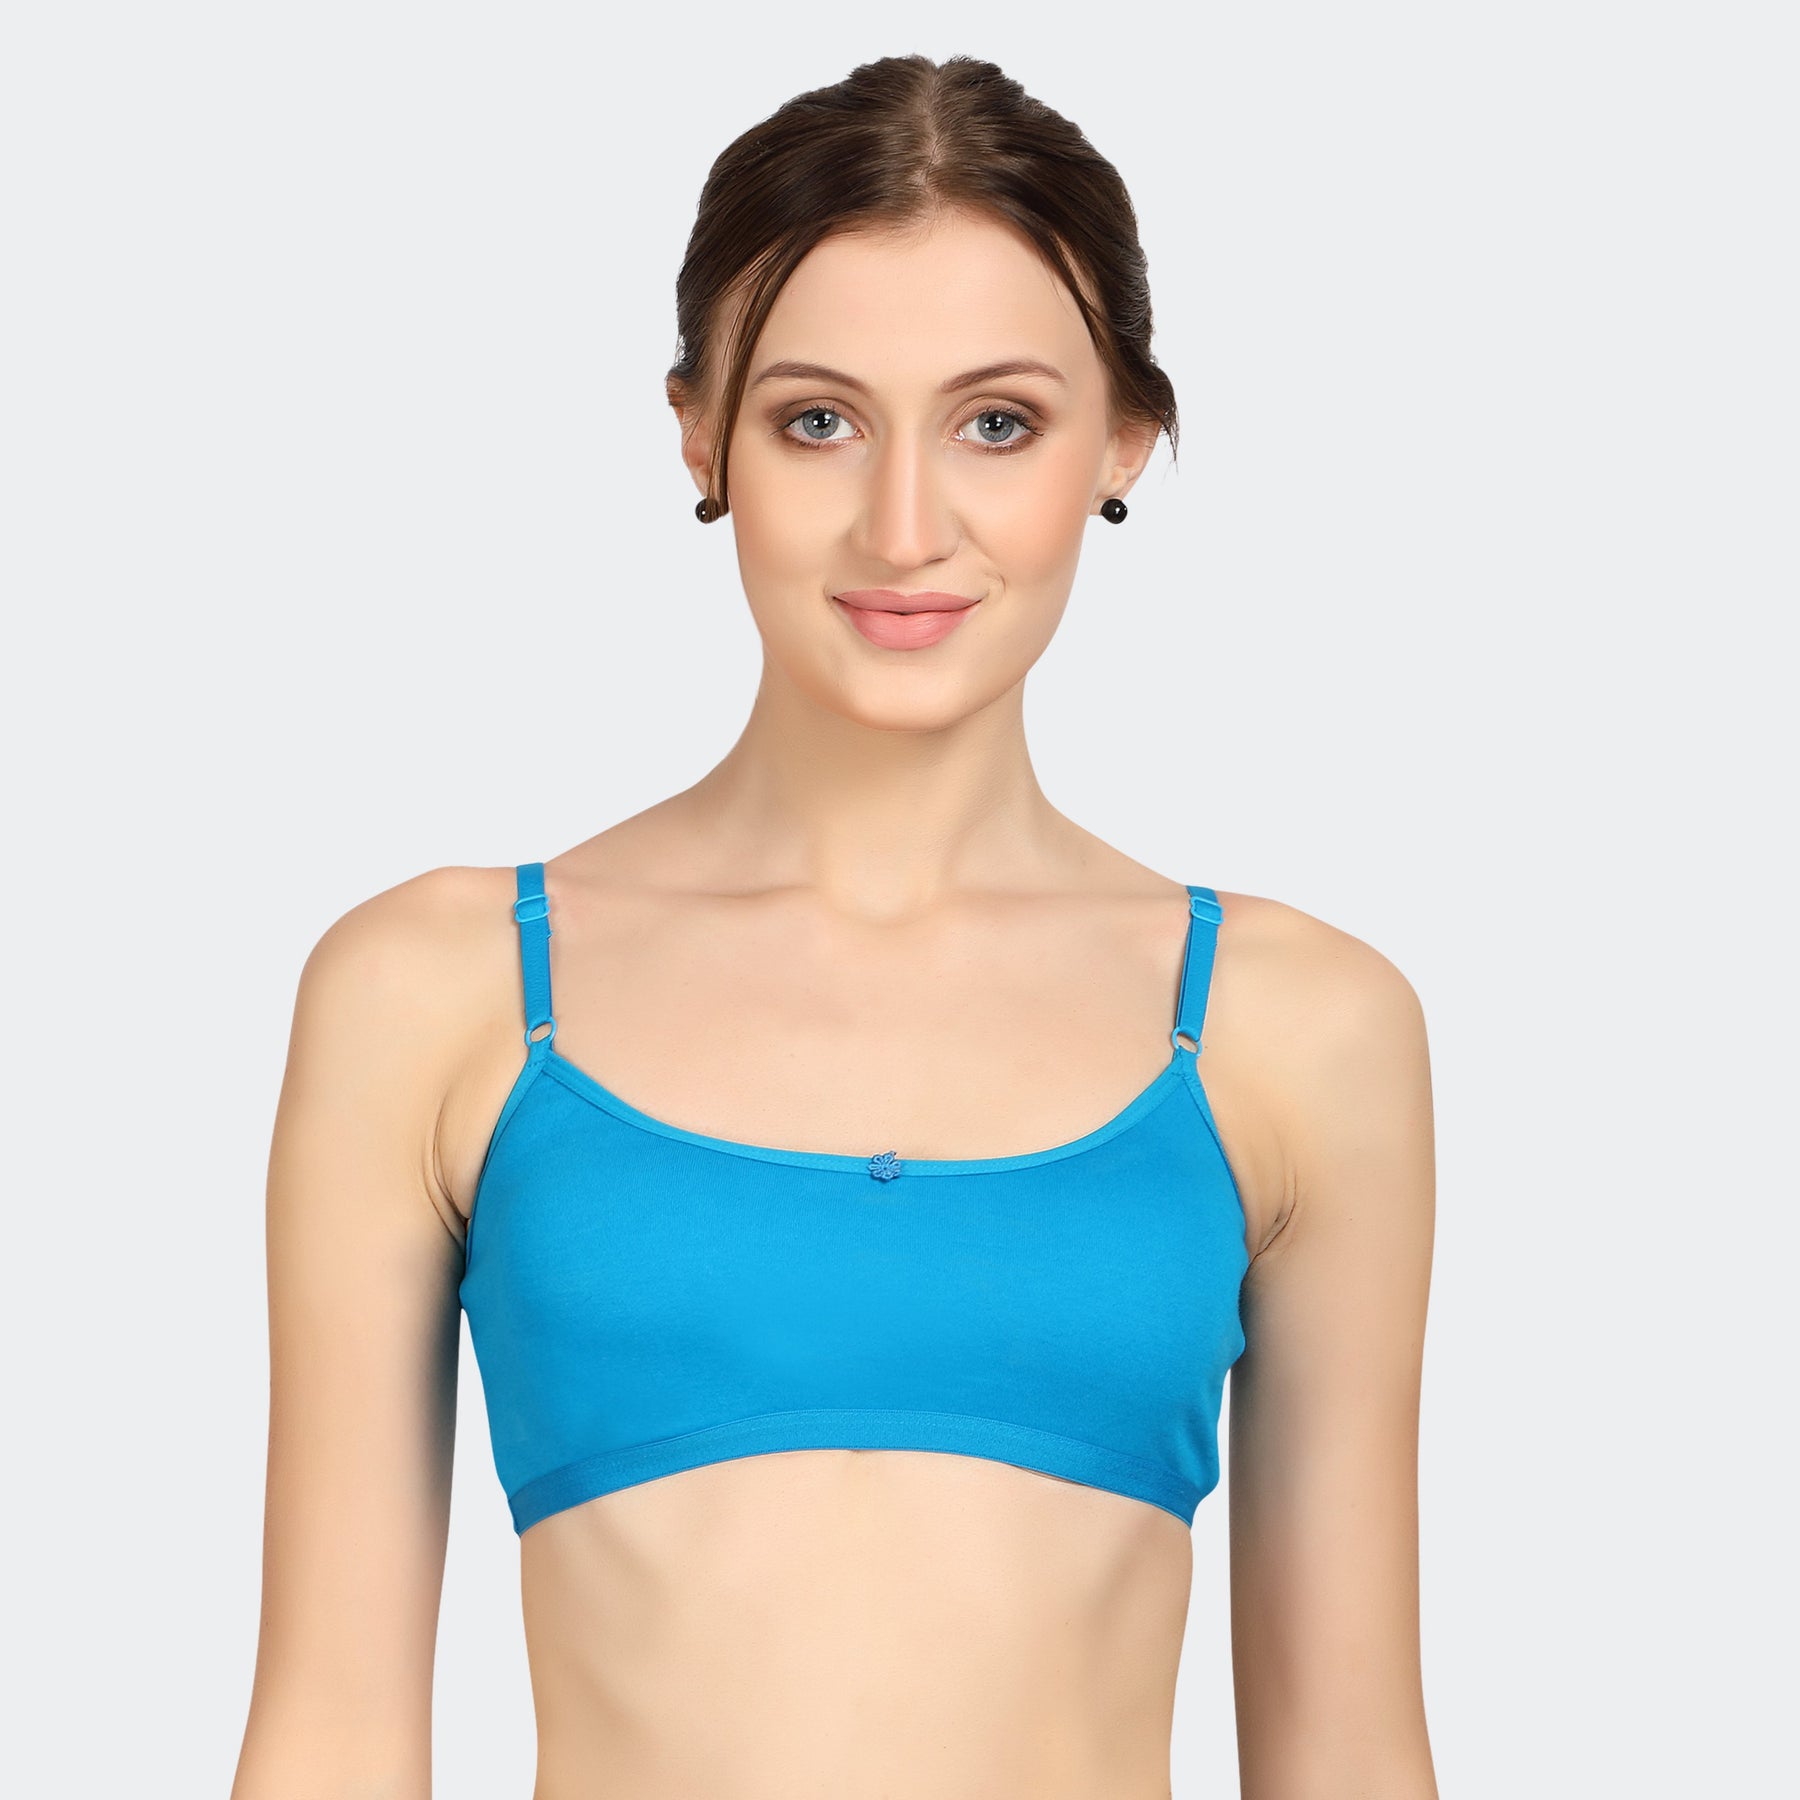 Buy Hasina Prithvi Inner WERAS Athletic Sporty Bra for Women Comes with  Soft and Comfortable Fabrics for All Day wear. (32B, Green) at